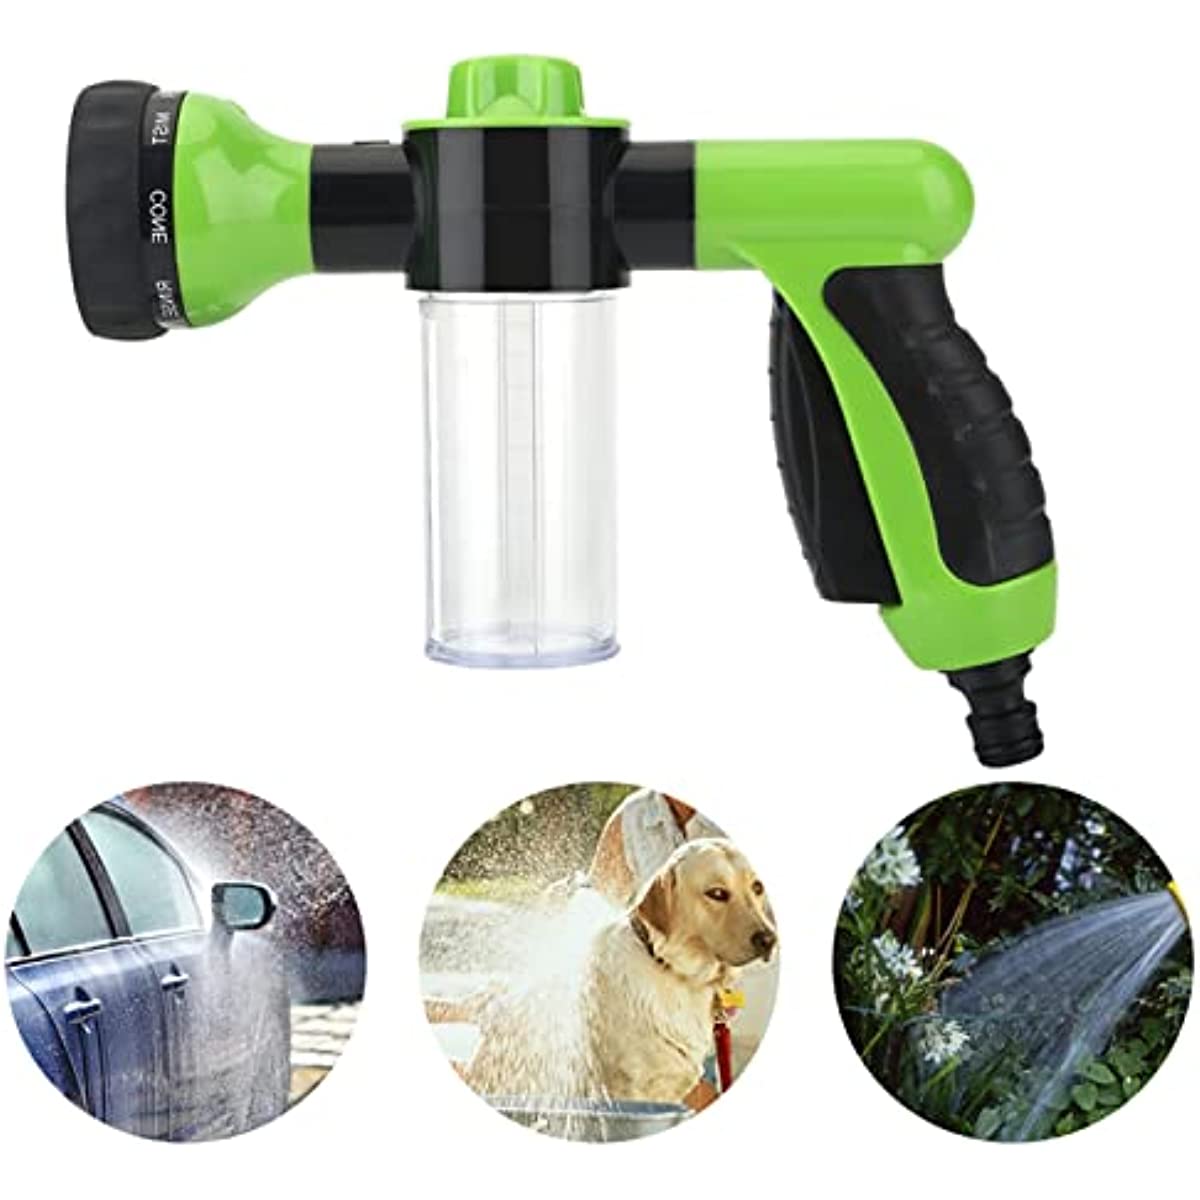 1pc 2L Car Wash Watering Can, Multi-function Air Pressure Sprayer, 0.5  Gallon Hand-held Car Wash Tool For Gardening Home Cleaning And Washing